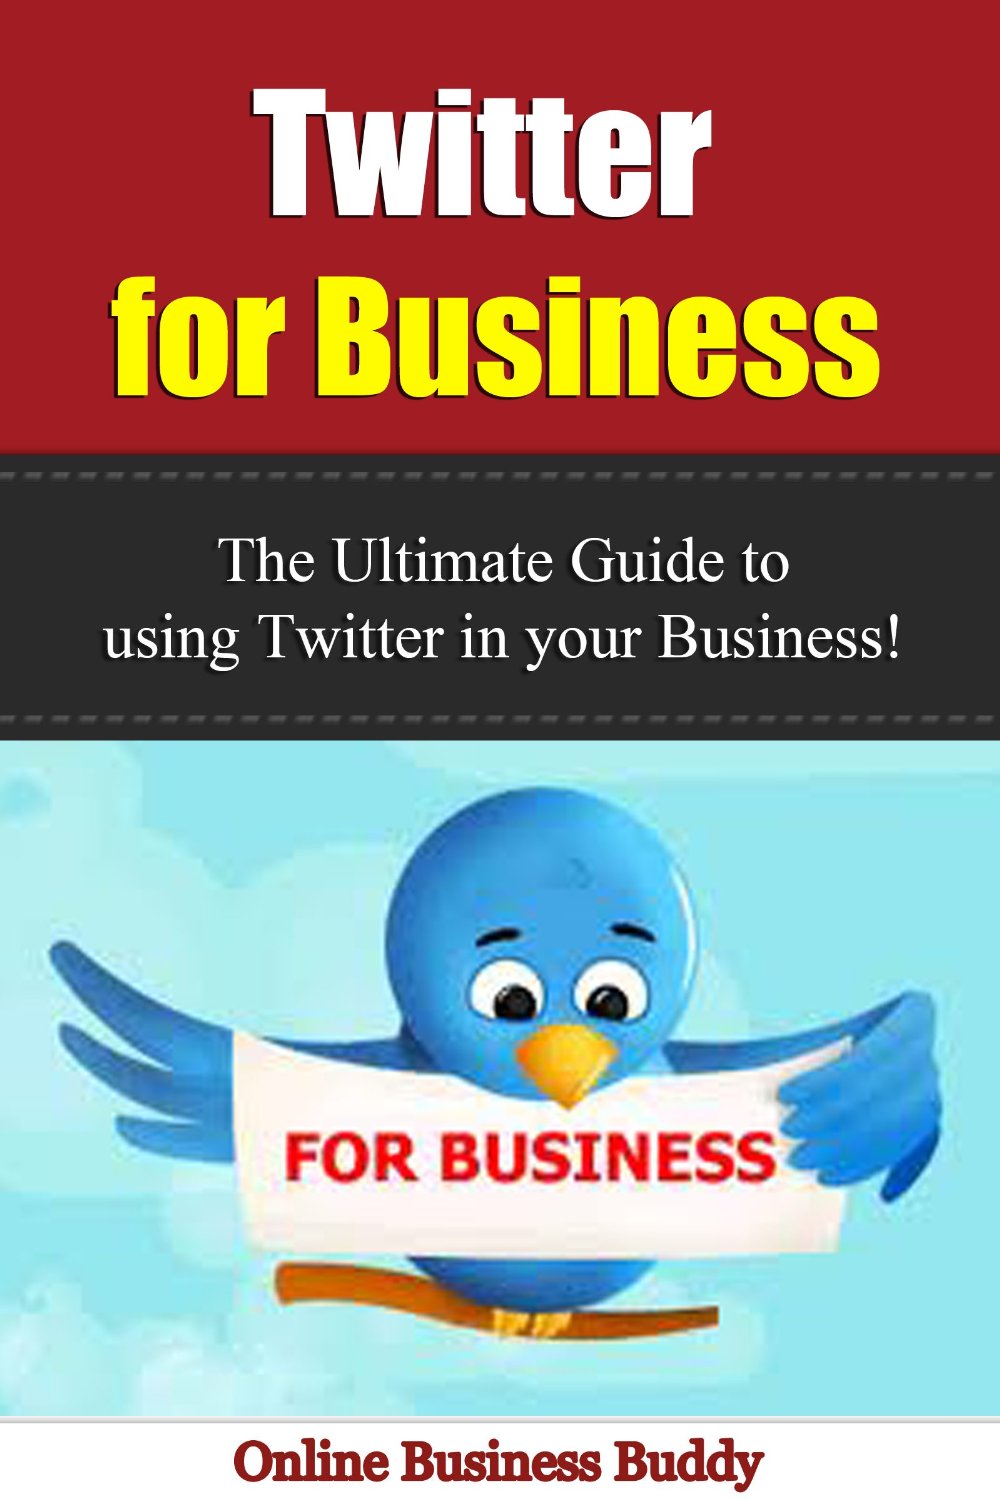 Twitter for Business: The Ultimate Guide to using Twitter In your Business! by Simone Lea